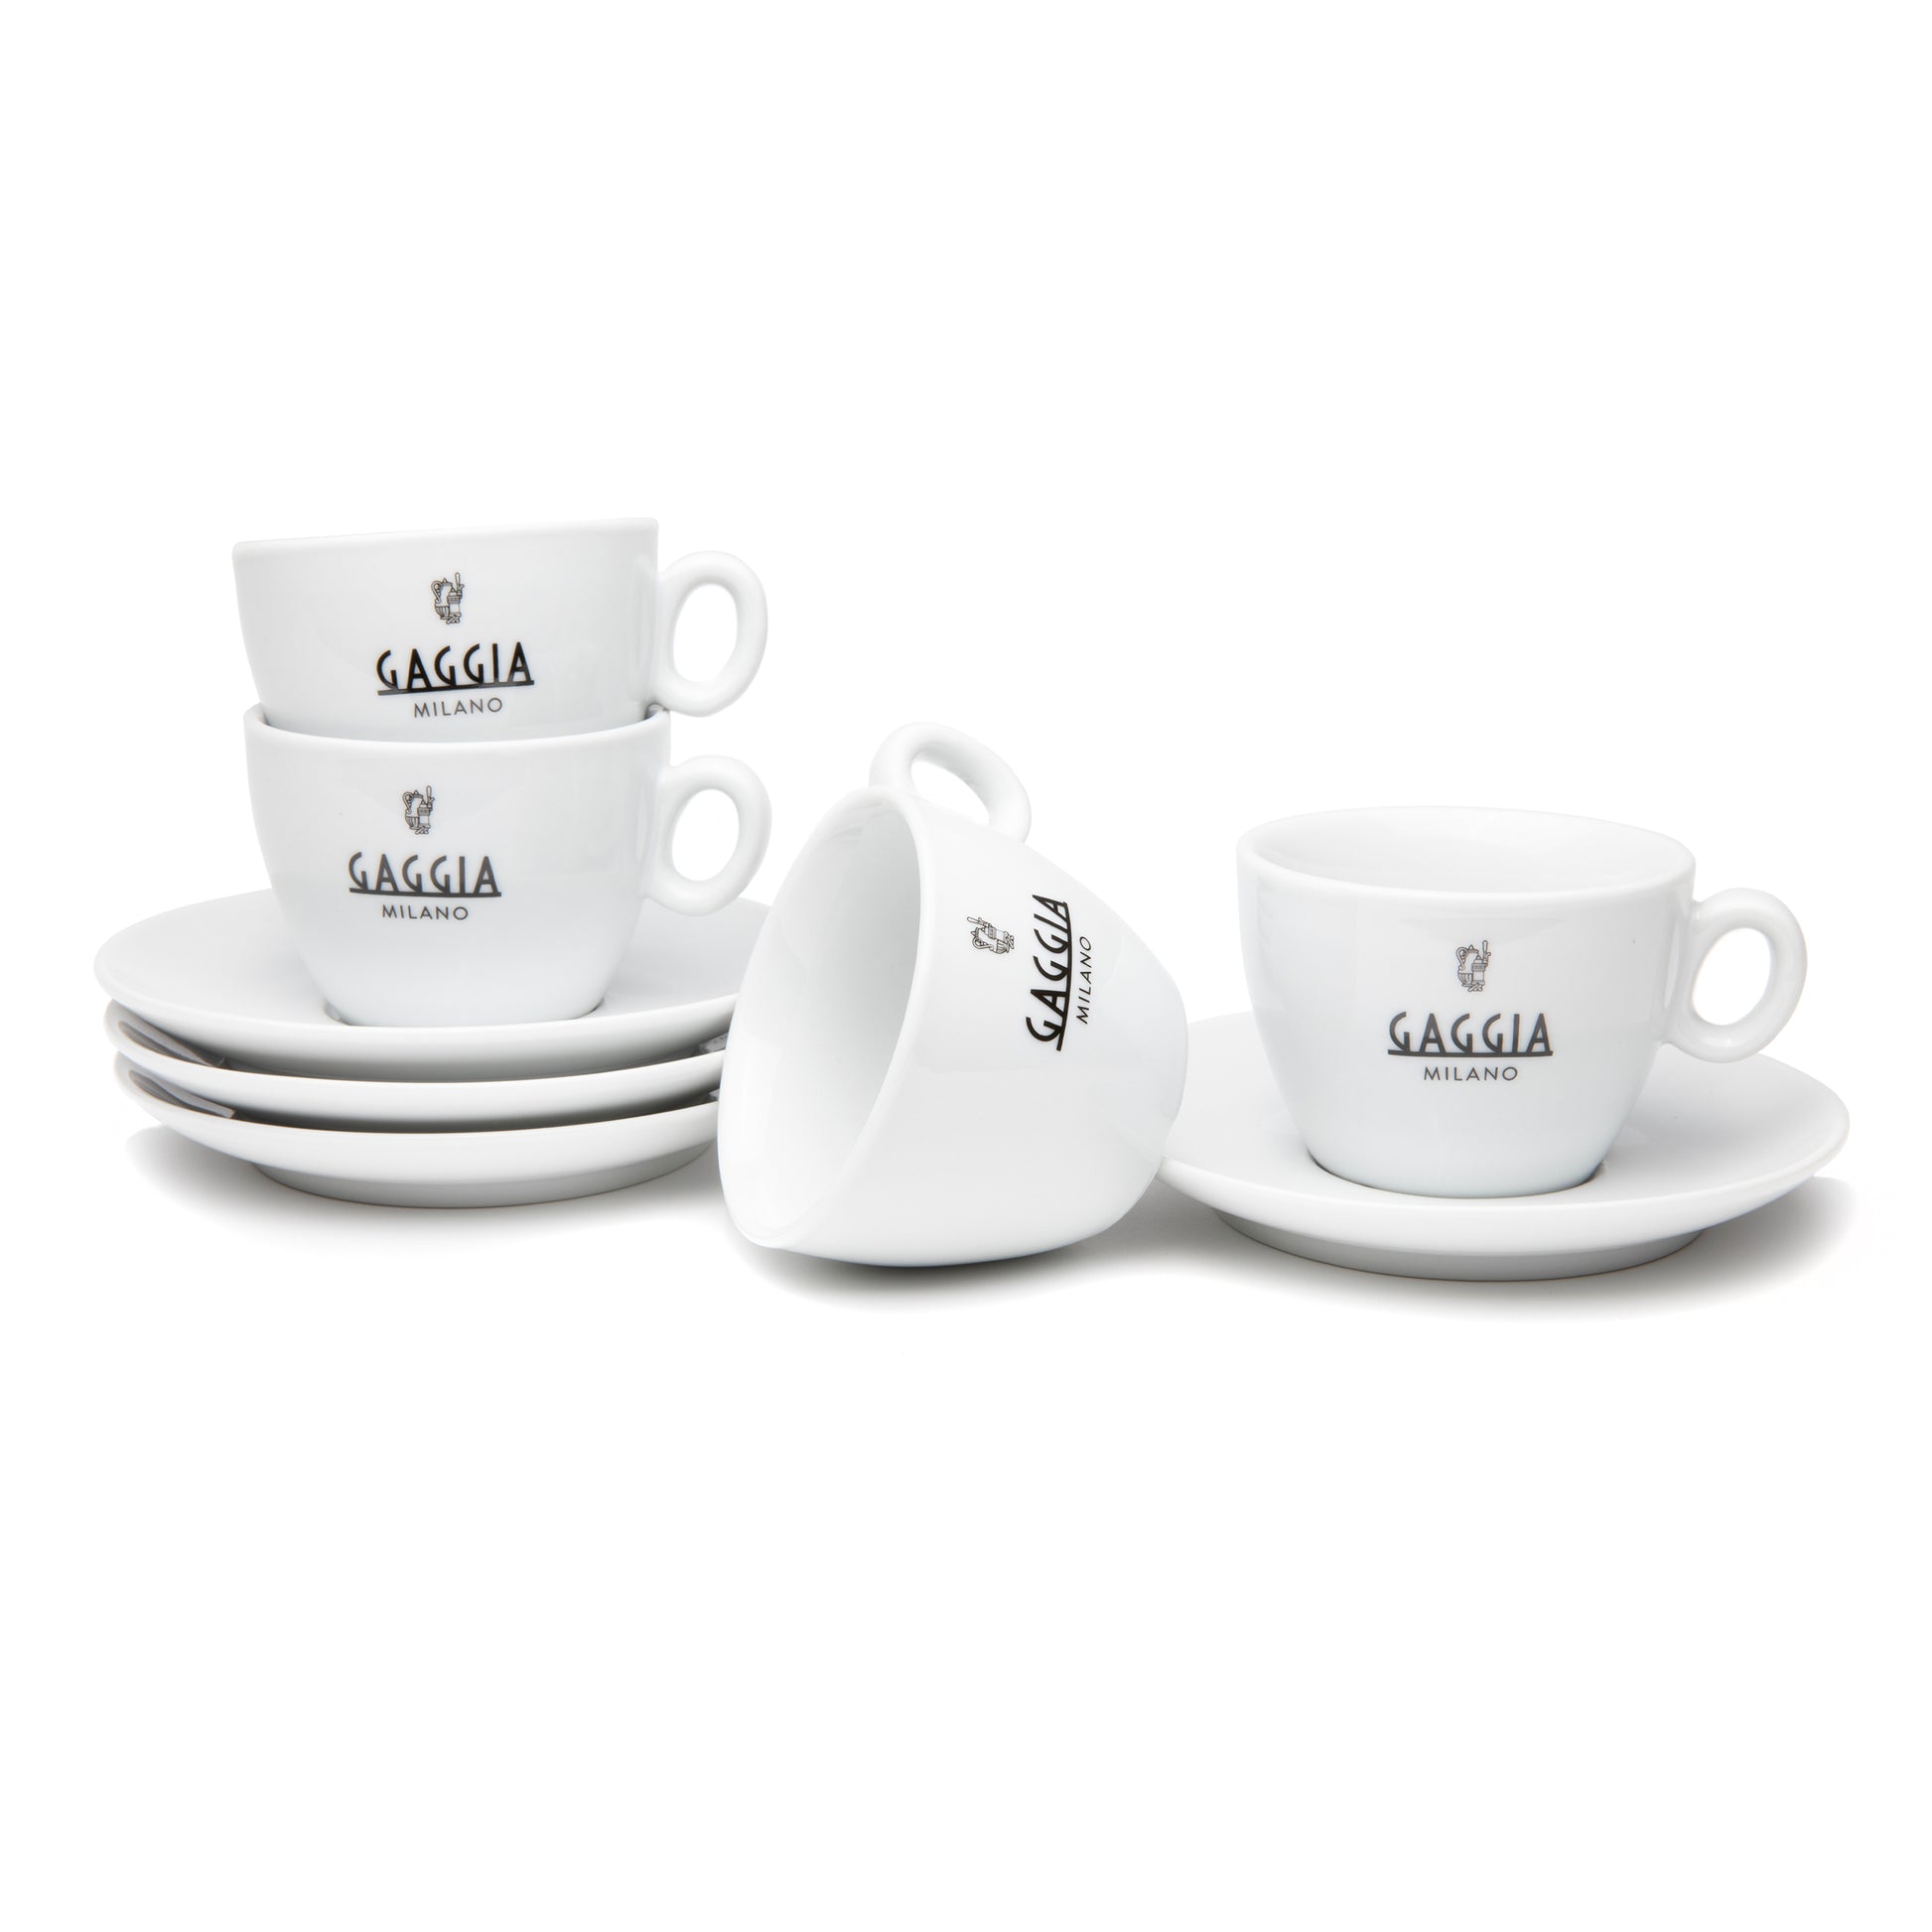 Quick recommendations for espresso cups, and cappuccino type cups?